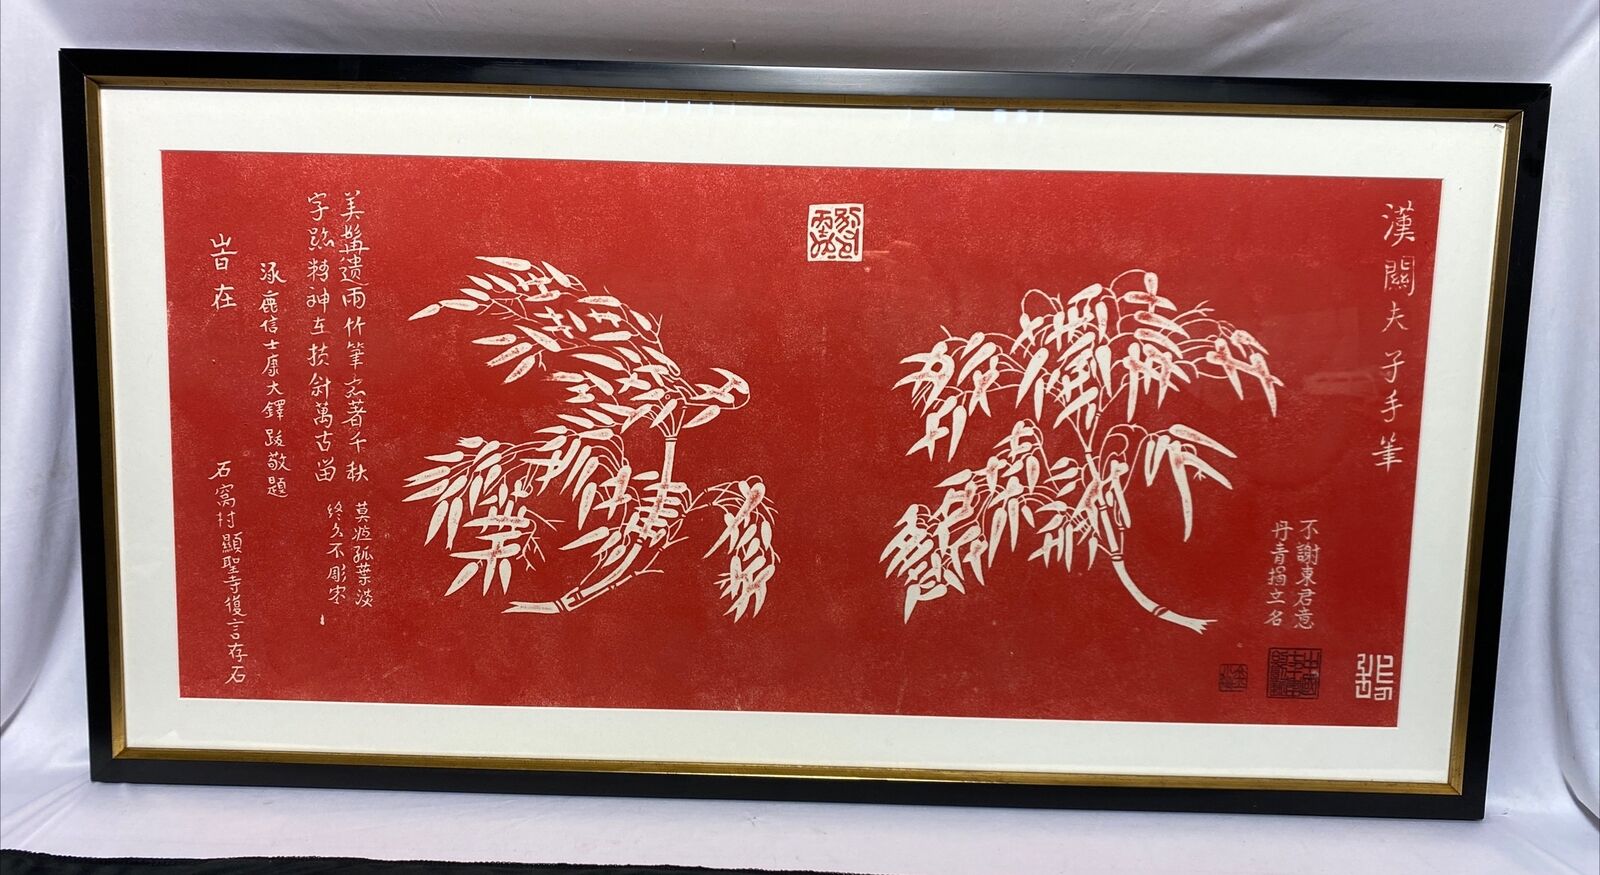 Vintage Original Chinese Stone Rubbing Red Ink Bamboo & Calligraphy Art Framed